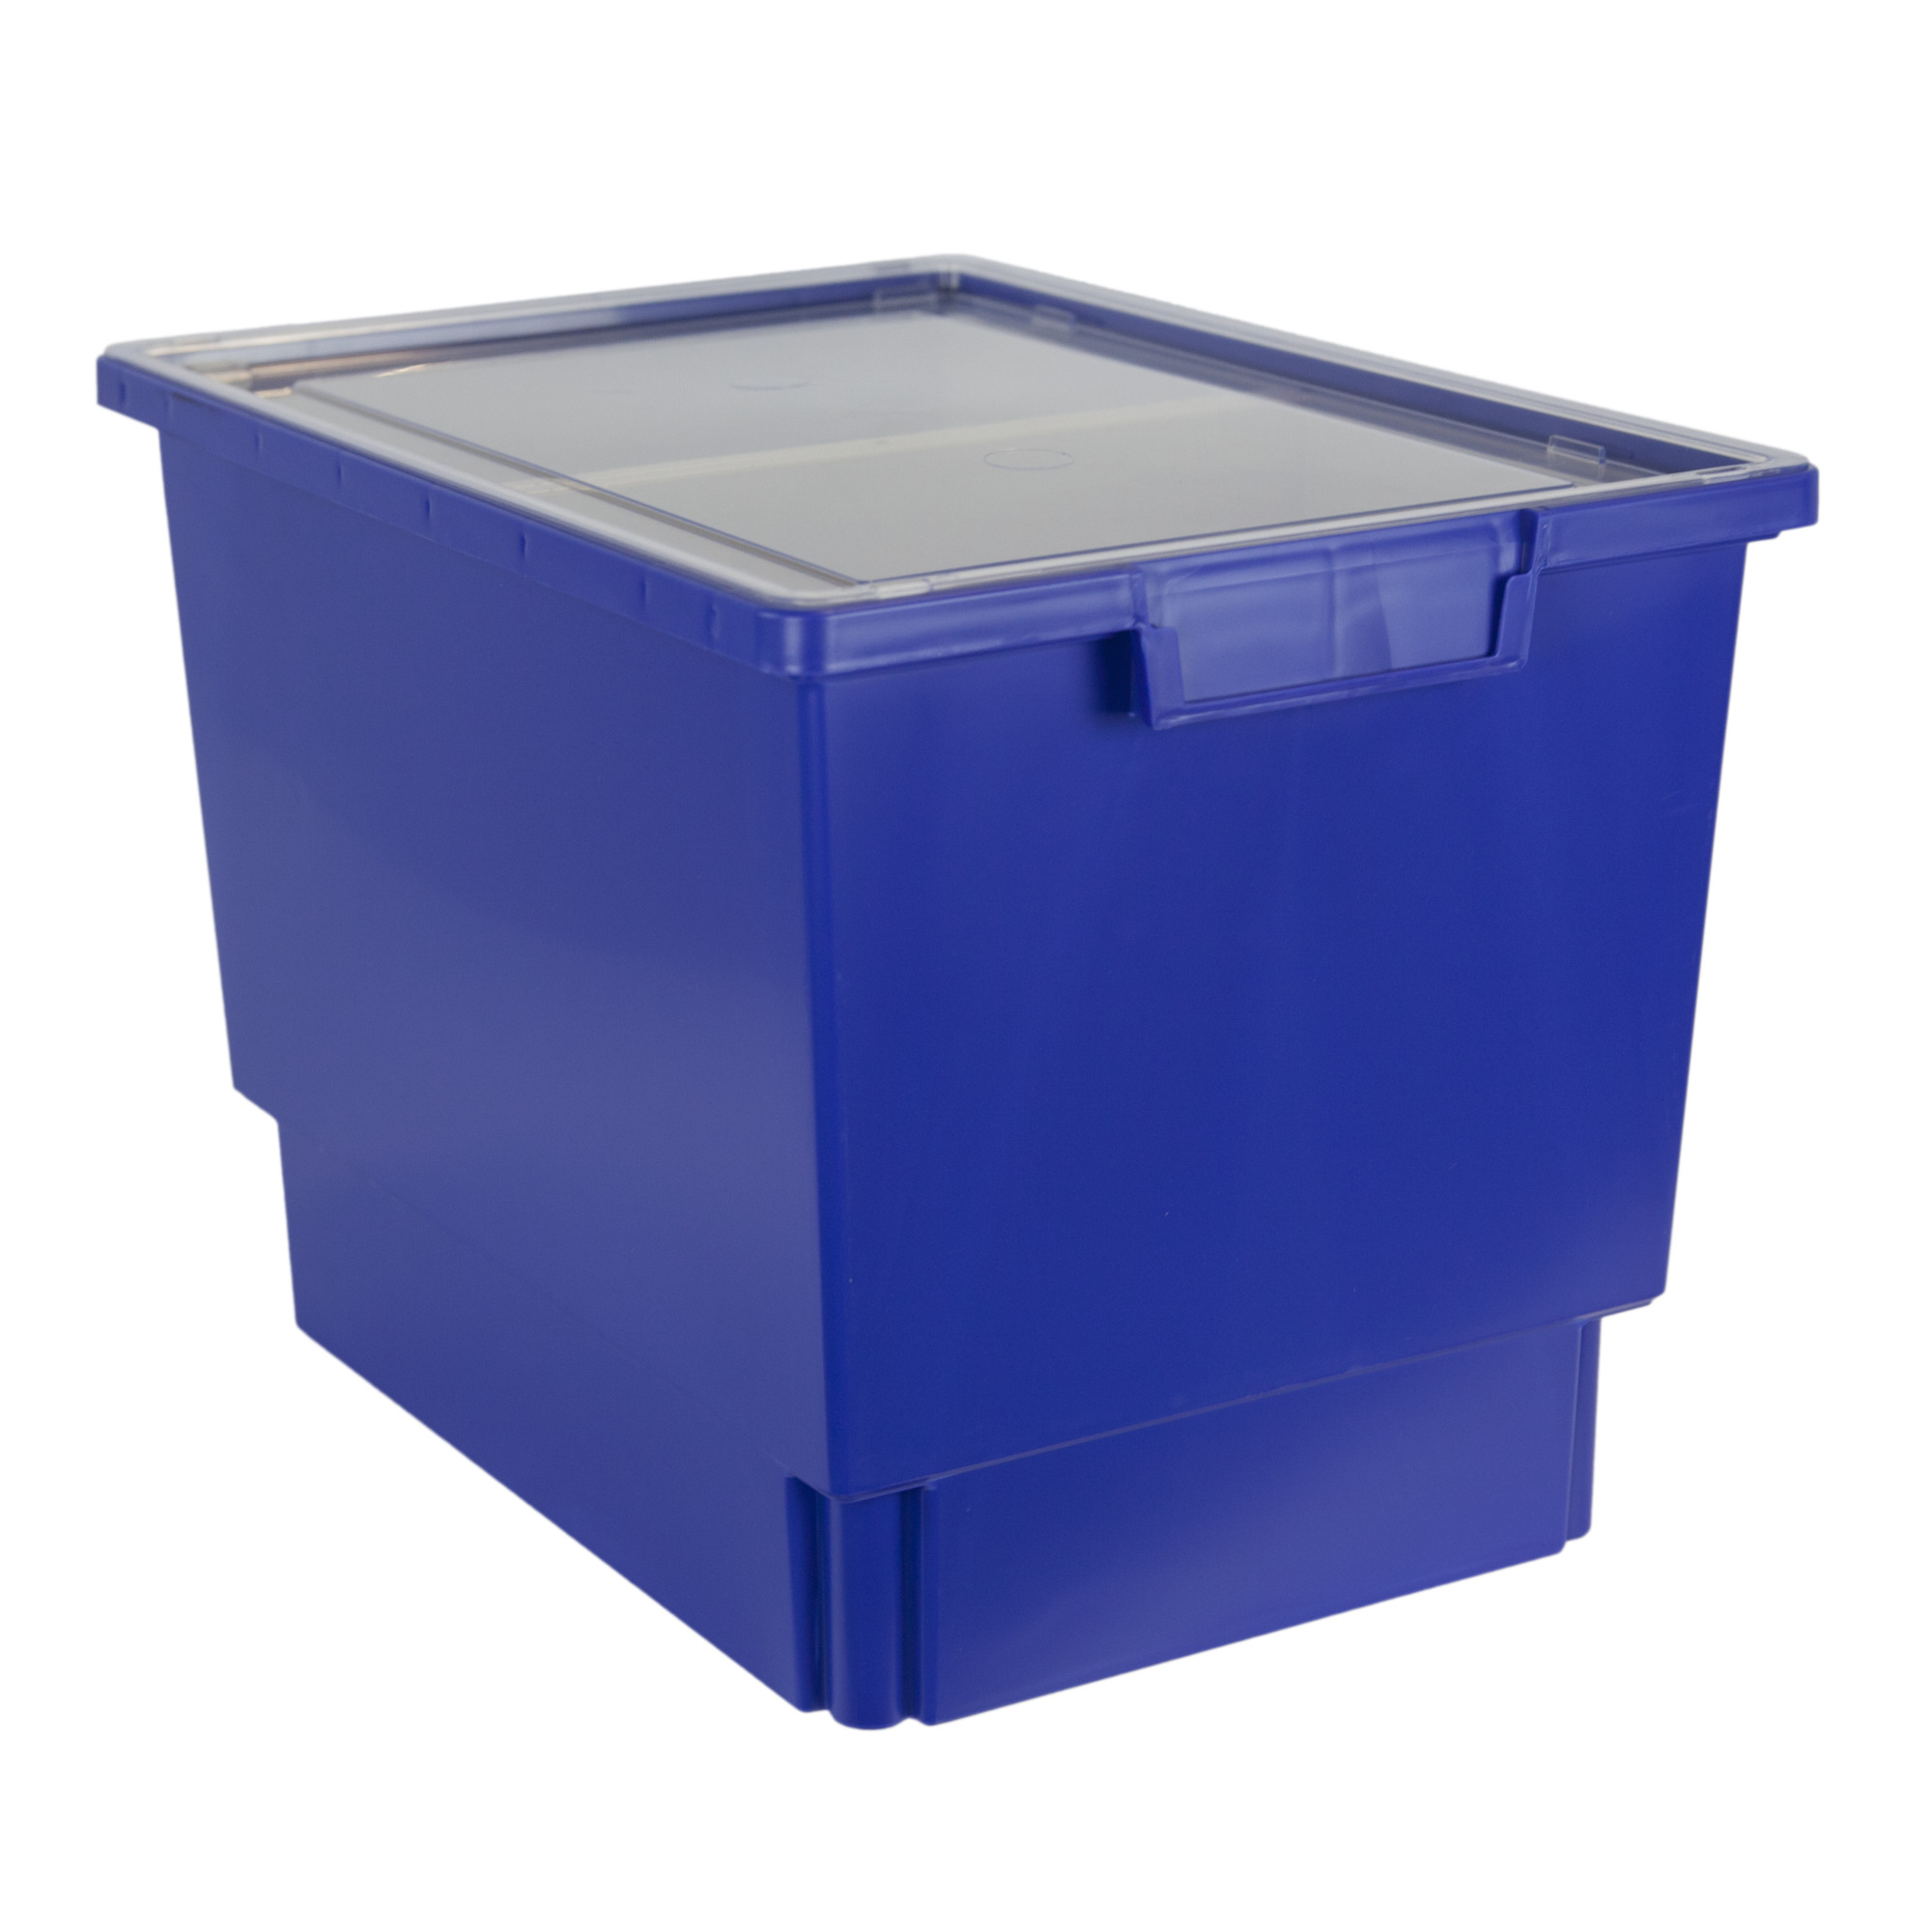 Certwood StorWerks, Slim Line 12Inch Tray Kit (2 x Divisions) Blue, Included (qty.) 1, Material Plastic, Height 12 in, Model CE1954PB-NK0404-1